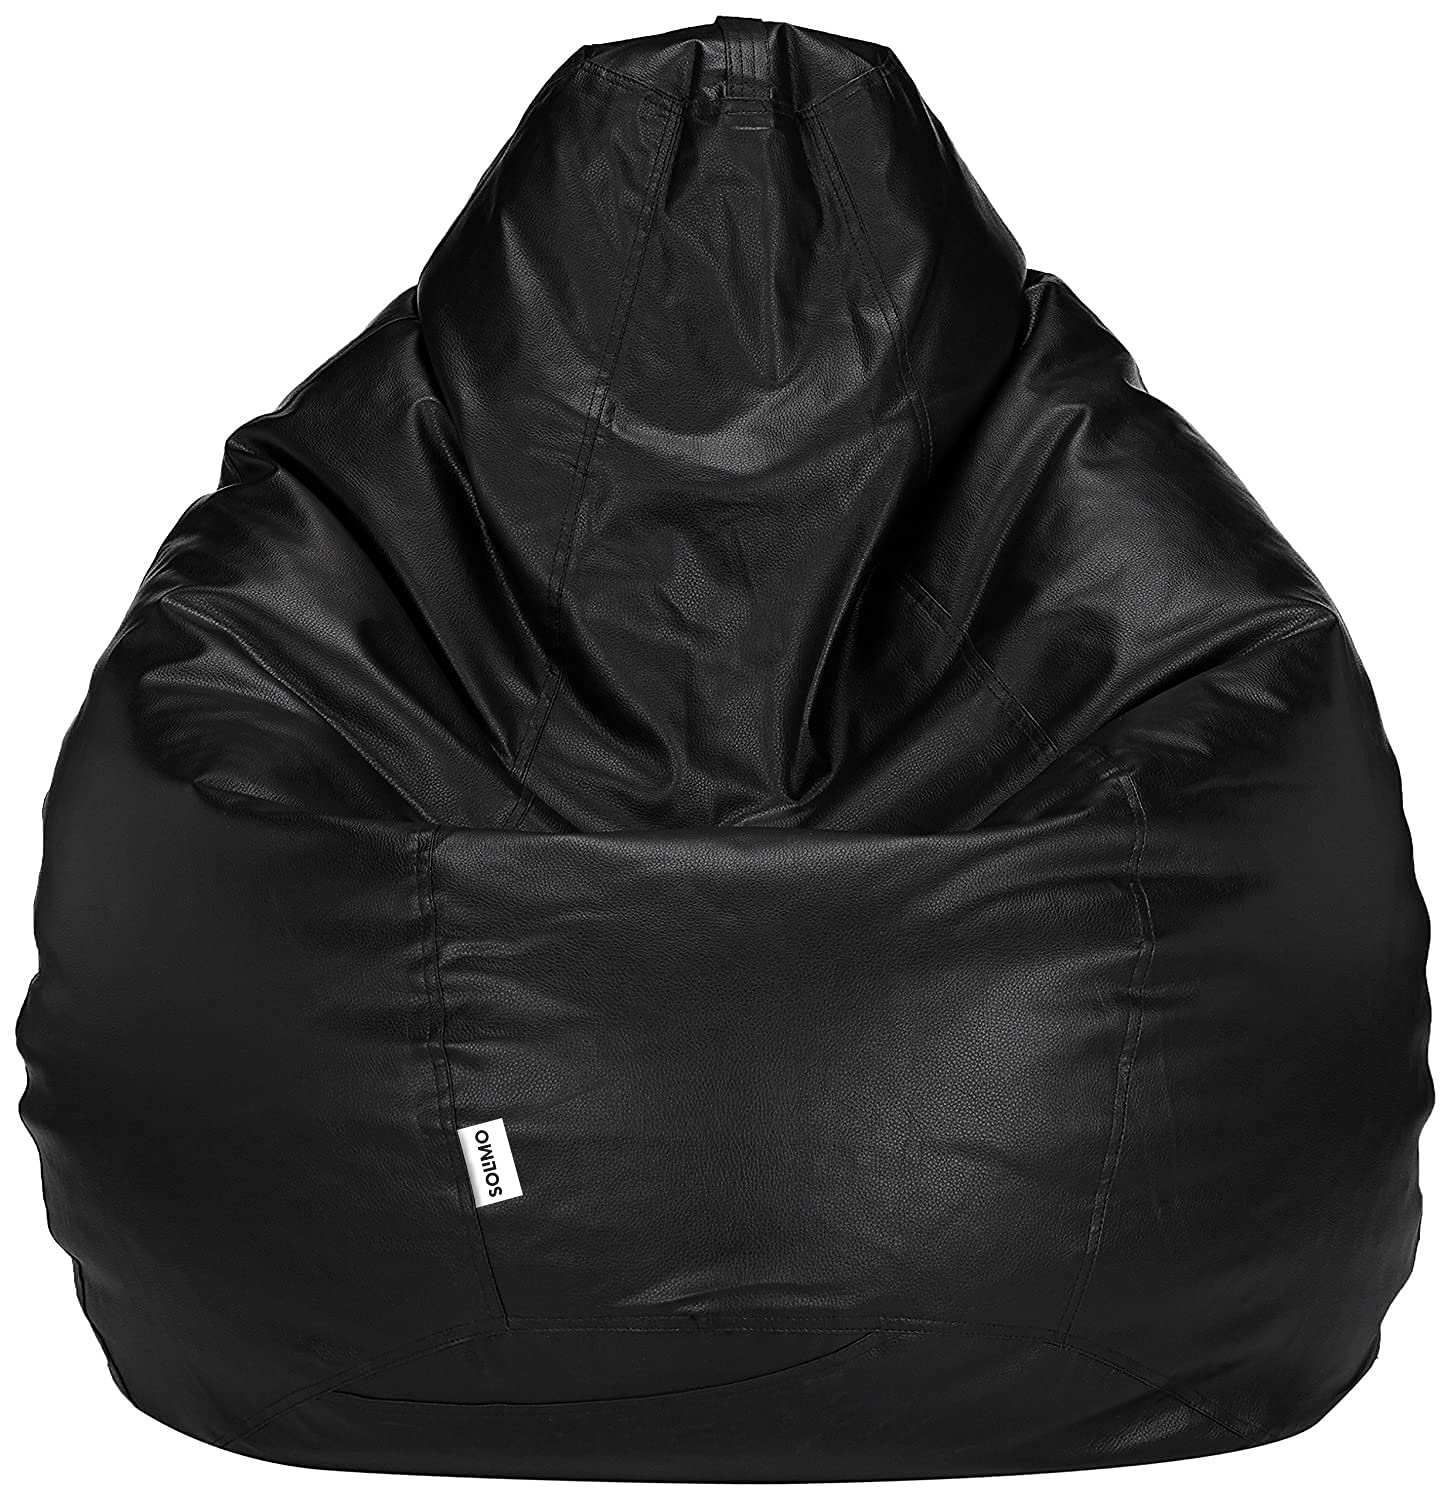 Solimo XXL Bean Bag Filled With Beans